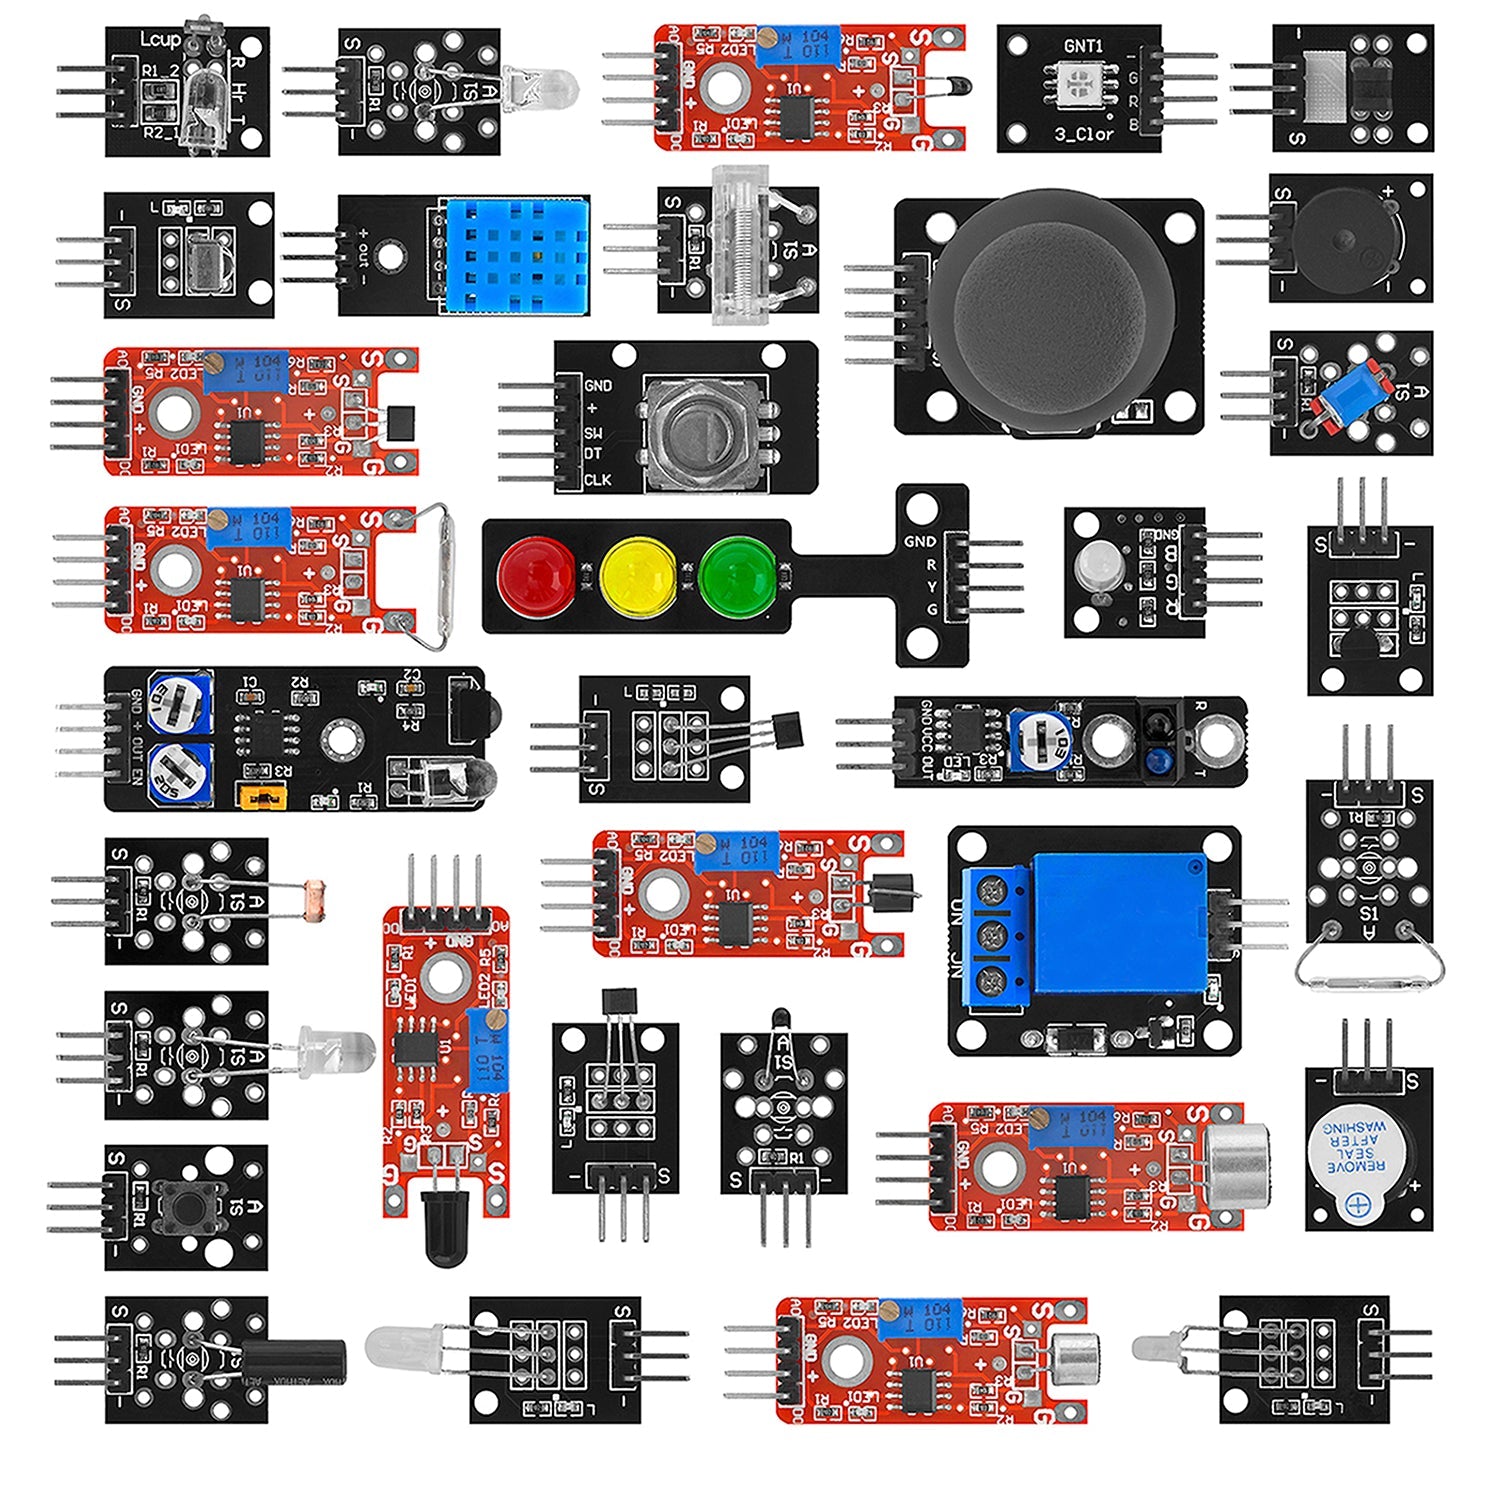 35 in 1 sensor kit module kit and accessories compatible with Arduino and Raspberry Pi